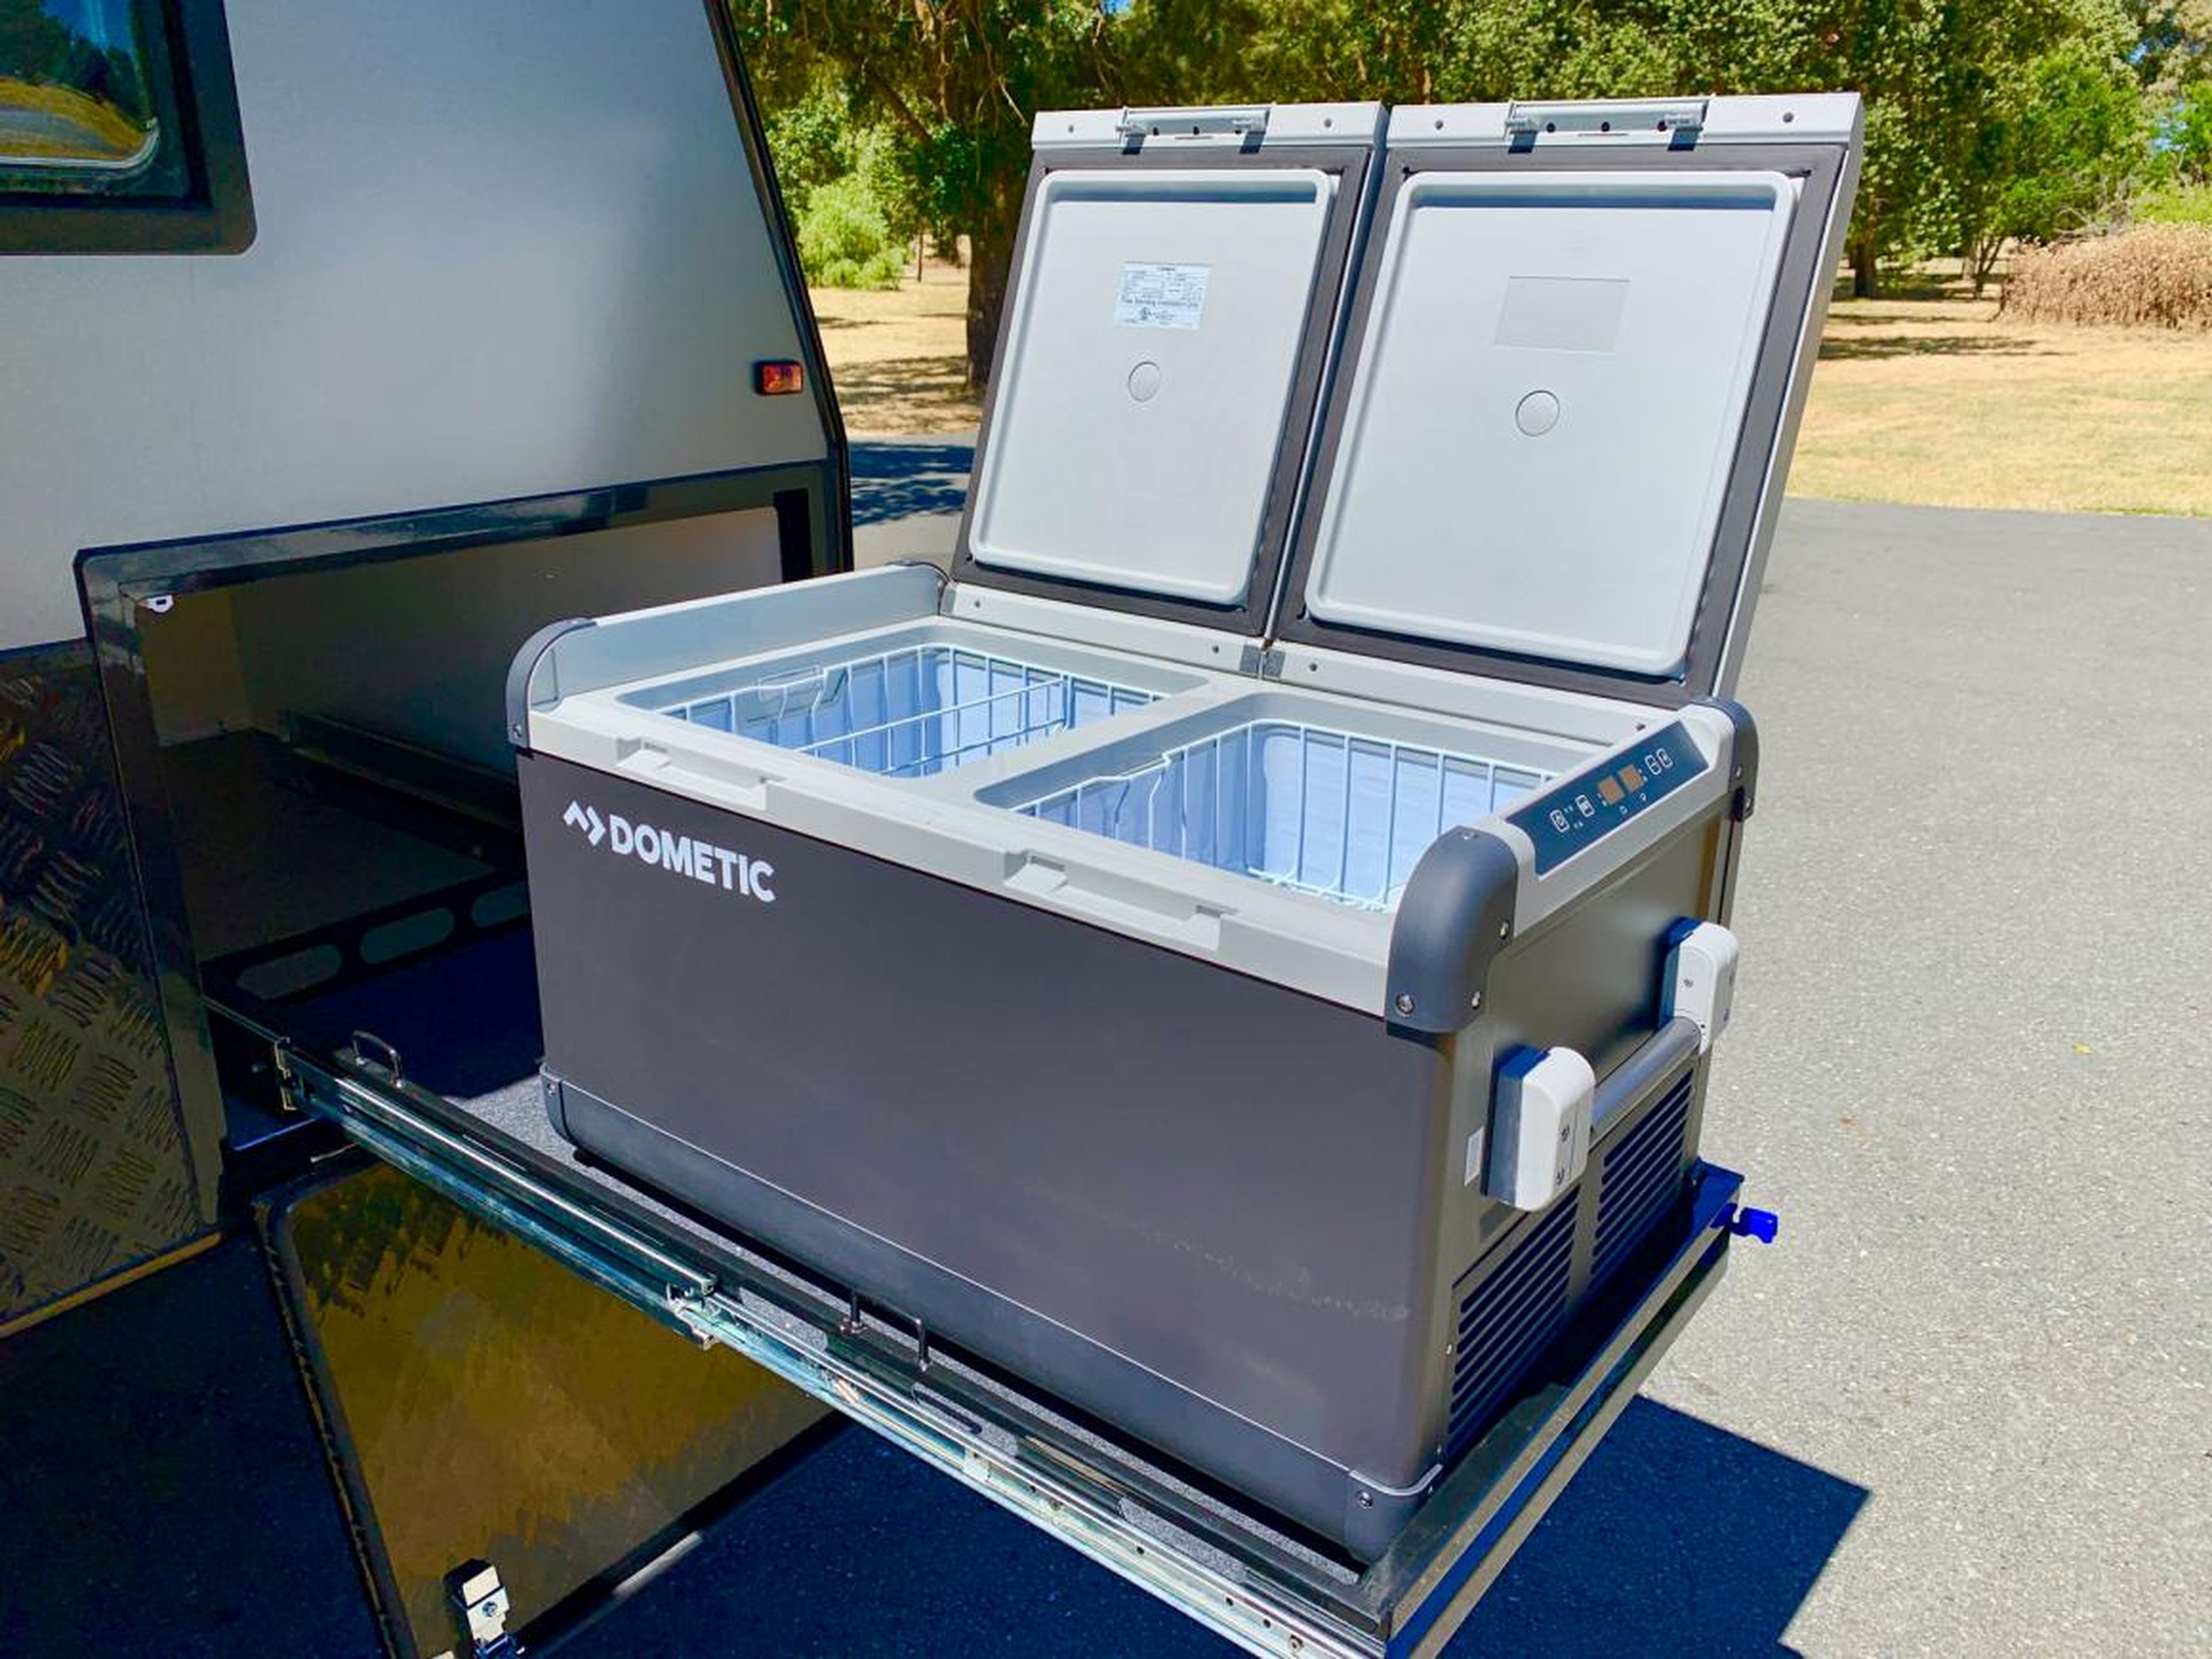 The electric cooler serves as both a fridge and a freezer.